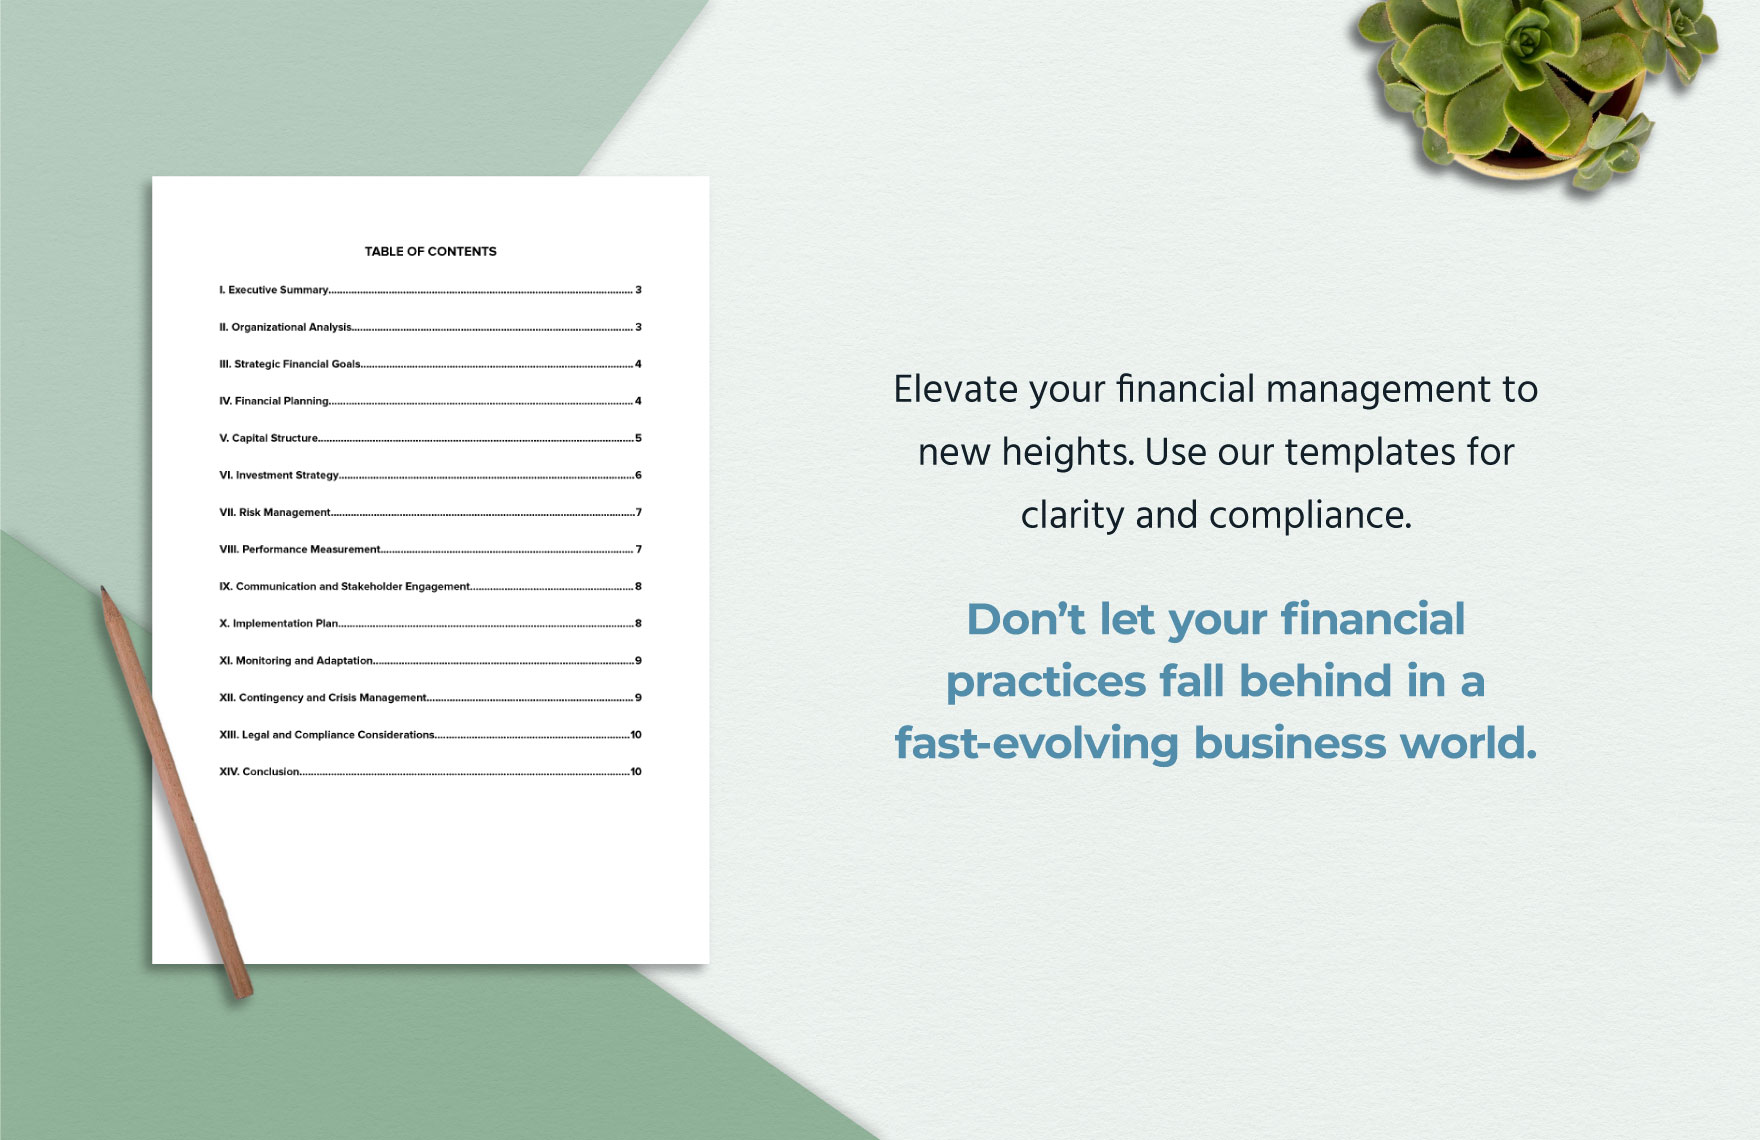 Financial Strategy Management Template